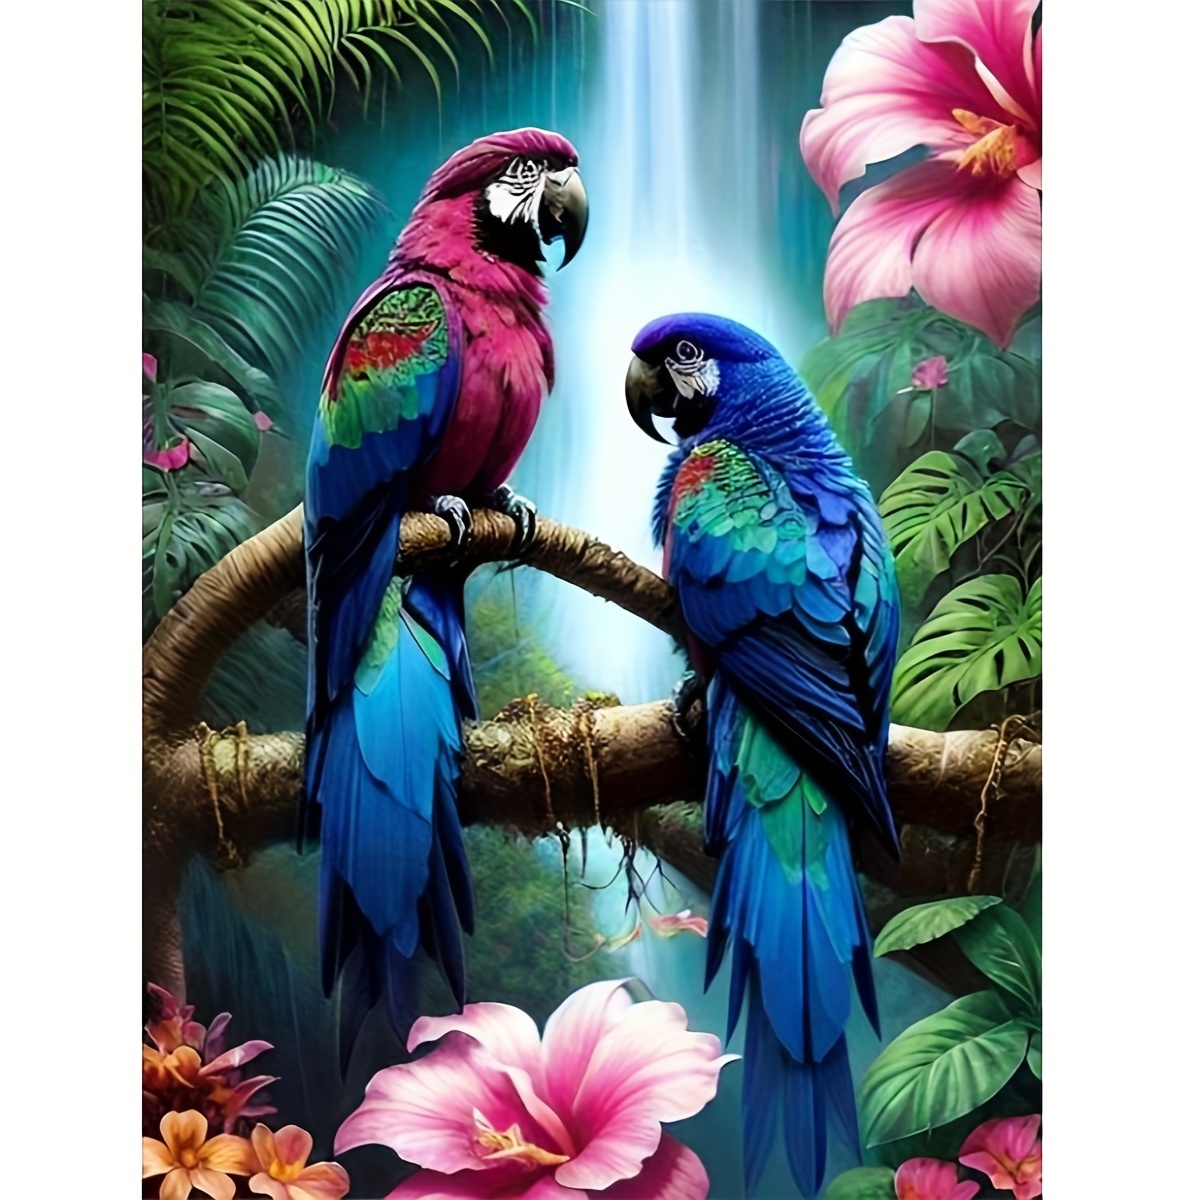 

1pc Frameless 11.8×15.7 Inch/30x40cm Animal Series Birds On Branches Pattern Diamond Art Painting Kit 5d Diamond Art Set Painting With Diamond Gems Arts And Crafts For Home Wall Decor